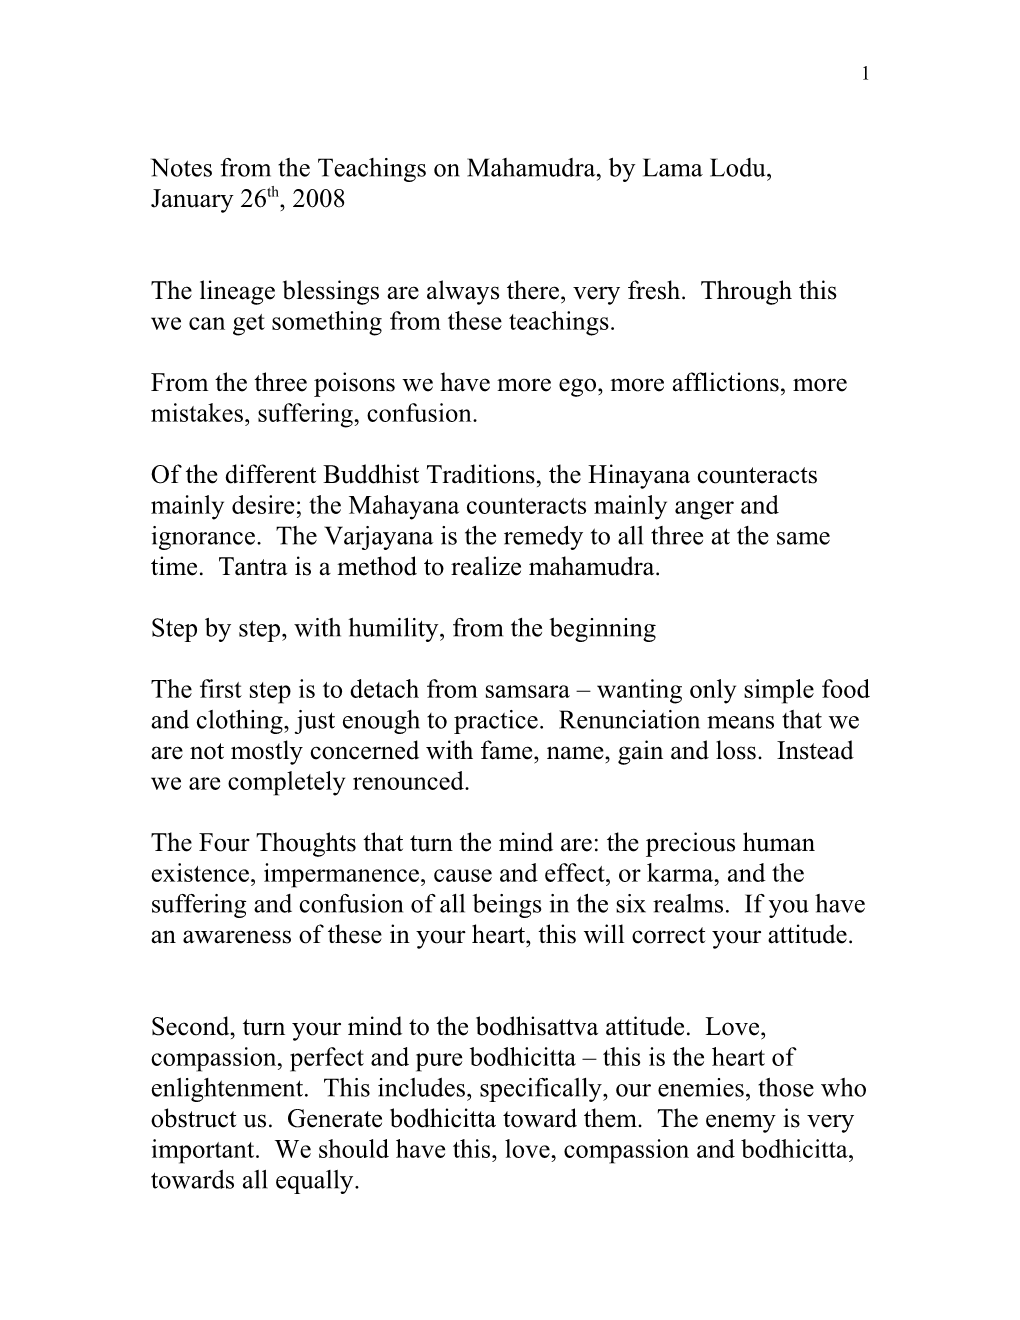 Notes from the Teachings on Mahamudra, by Lama Lodu